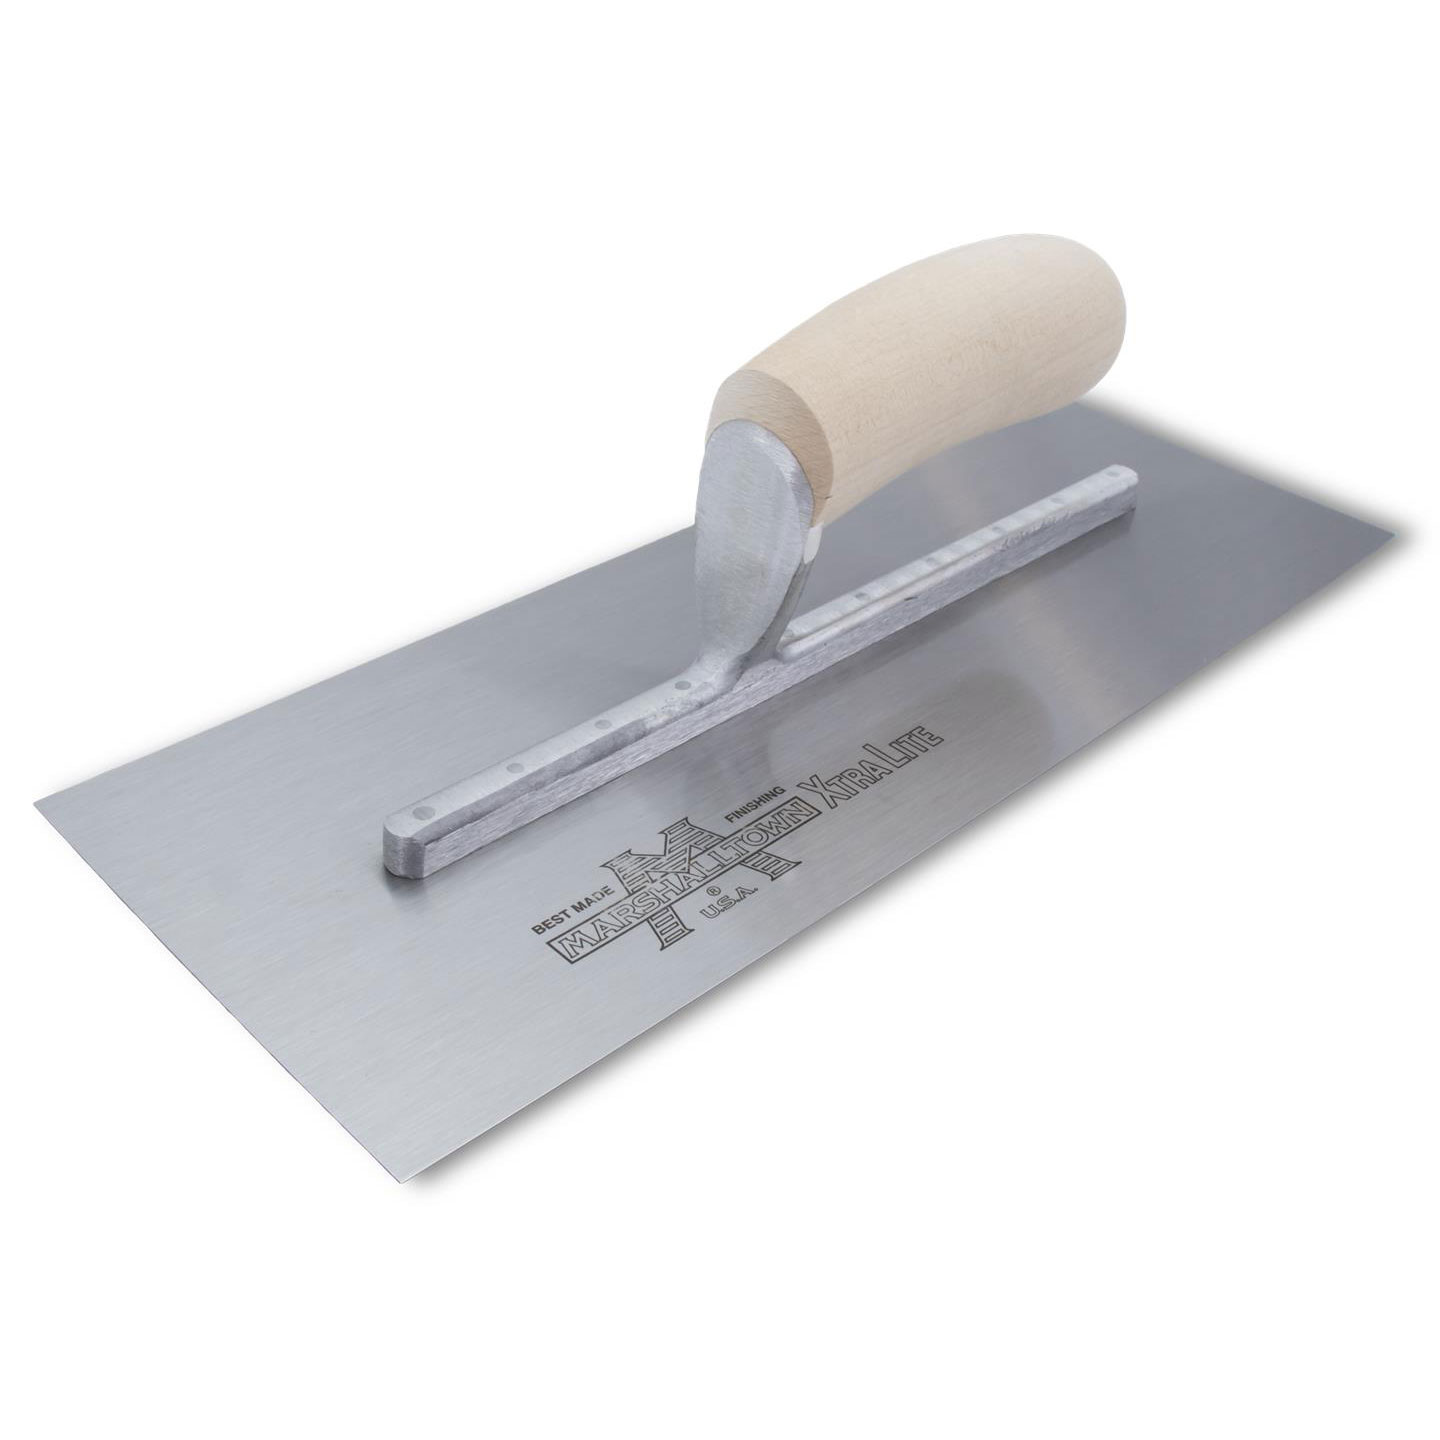 Marshalltown MX114 11in x 4in Finishing Trowel with Straight Wood Handle MX114